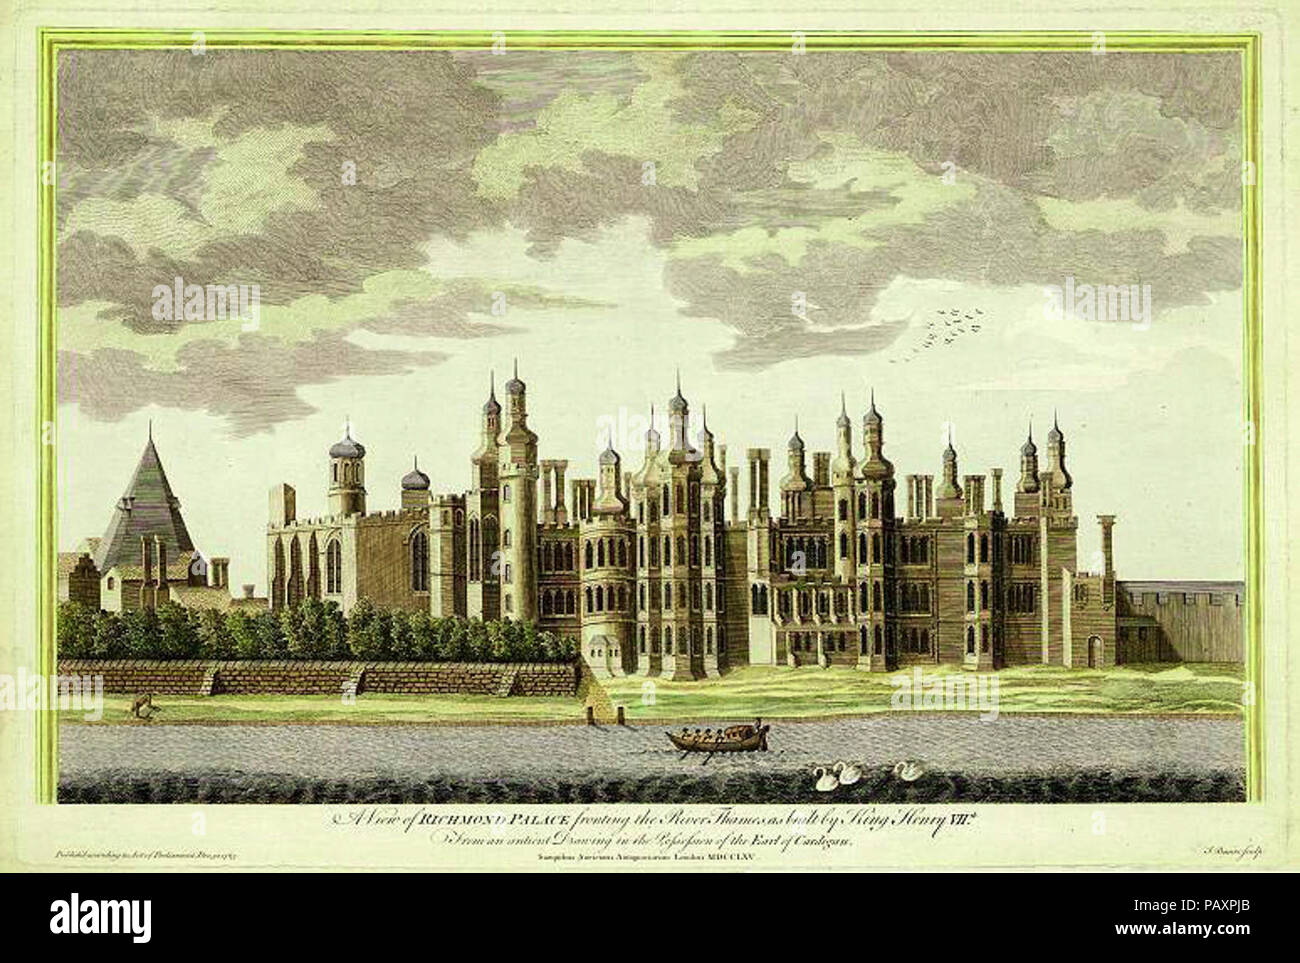 A View of Richmond Palace published in 1765. Stock Photo